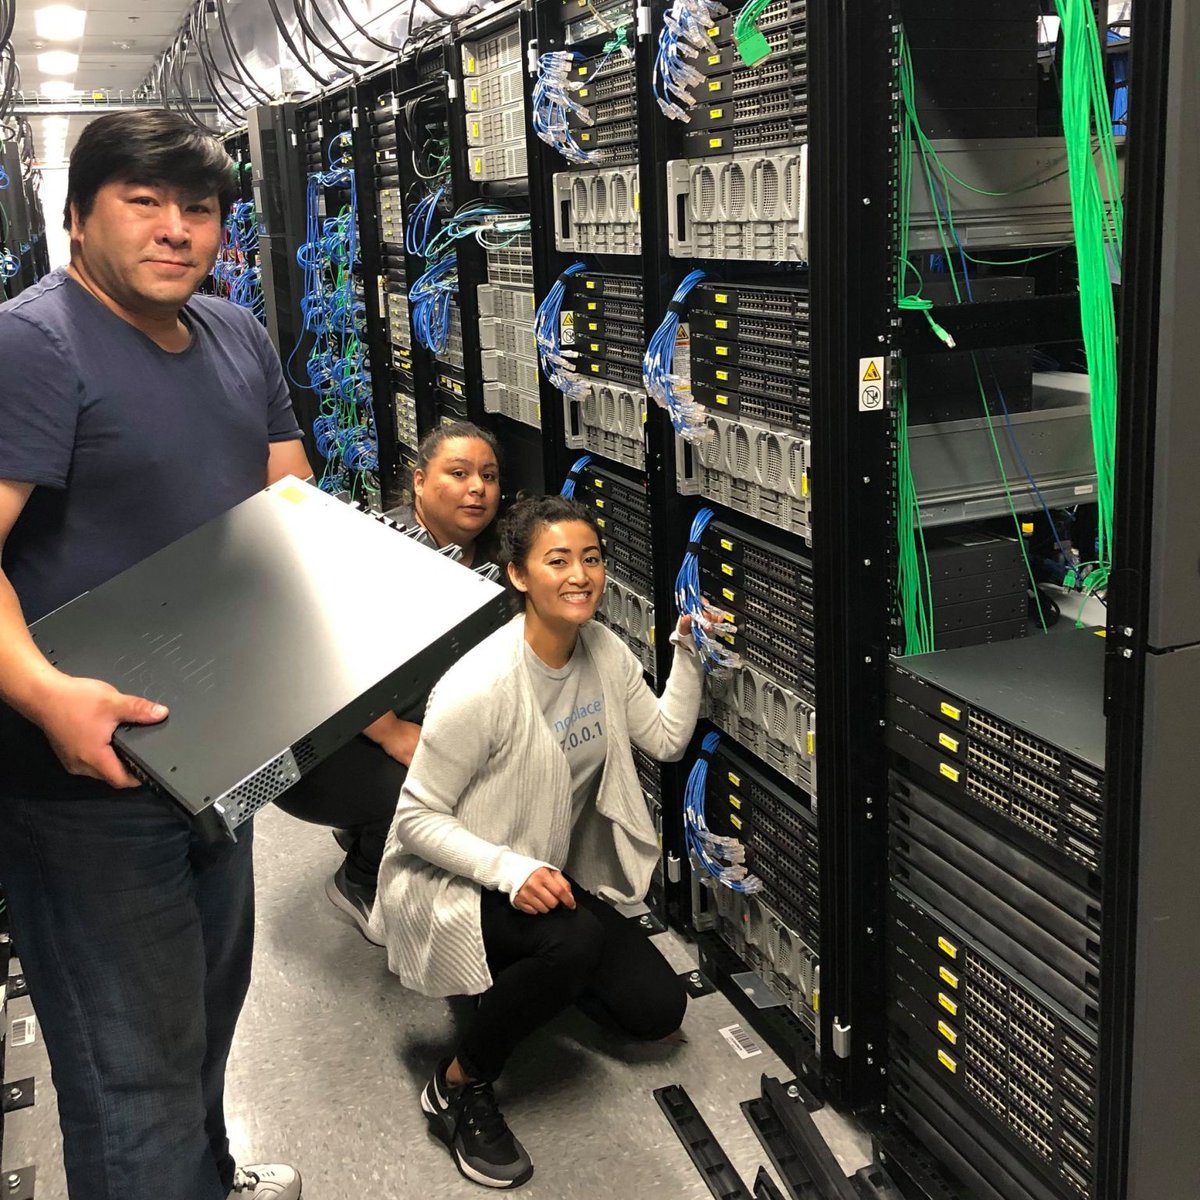 Apply to become an intern at @Cisco! 🙌 cs.co/6013enHft Check out our NetAcad Job of the Week and you may be a Software Engineer Intern in various locations across the US 😁 REMINDER: make sure you point out you heard about this opportunity from NetAcad 😉 #NetAcadJOTW